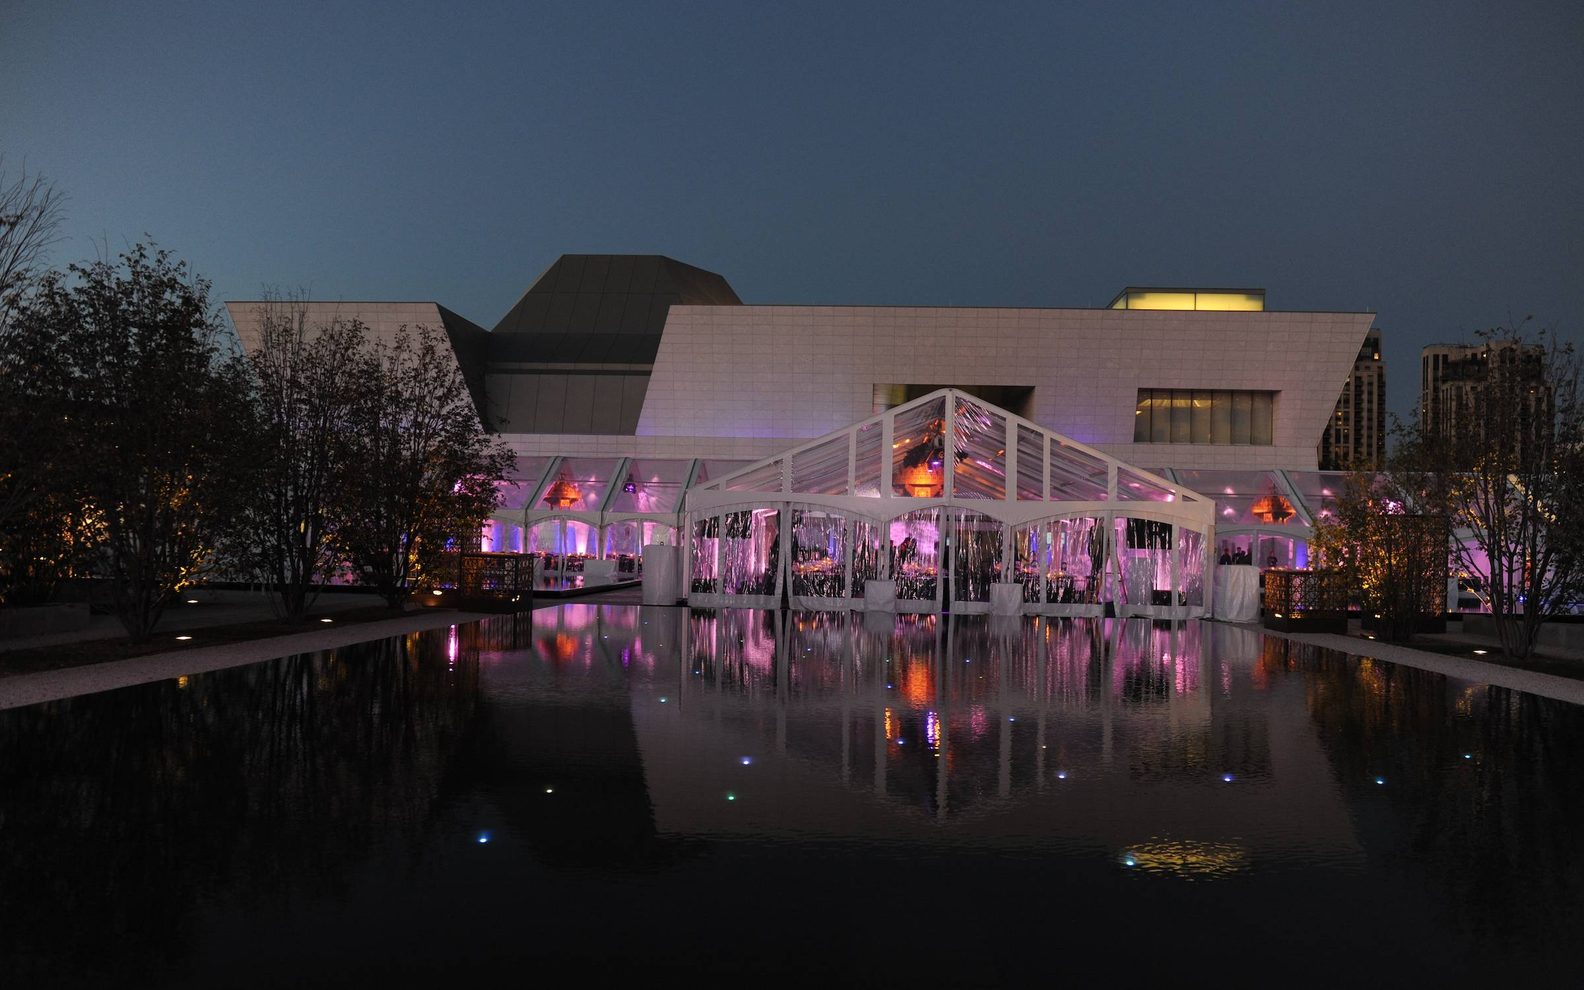 Wide exterior view of the Aga Khan Museum main entrance with a special events tent at night